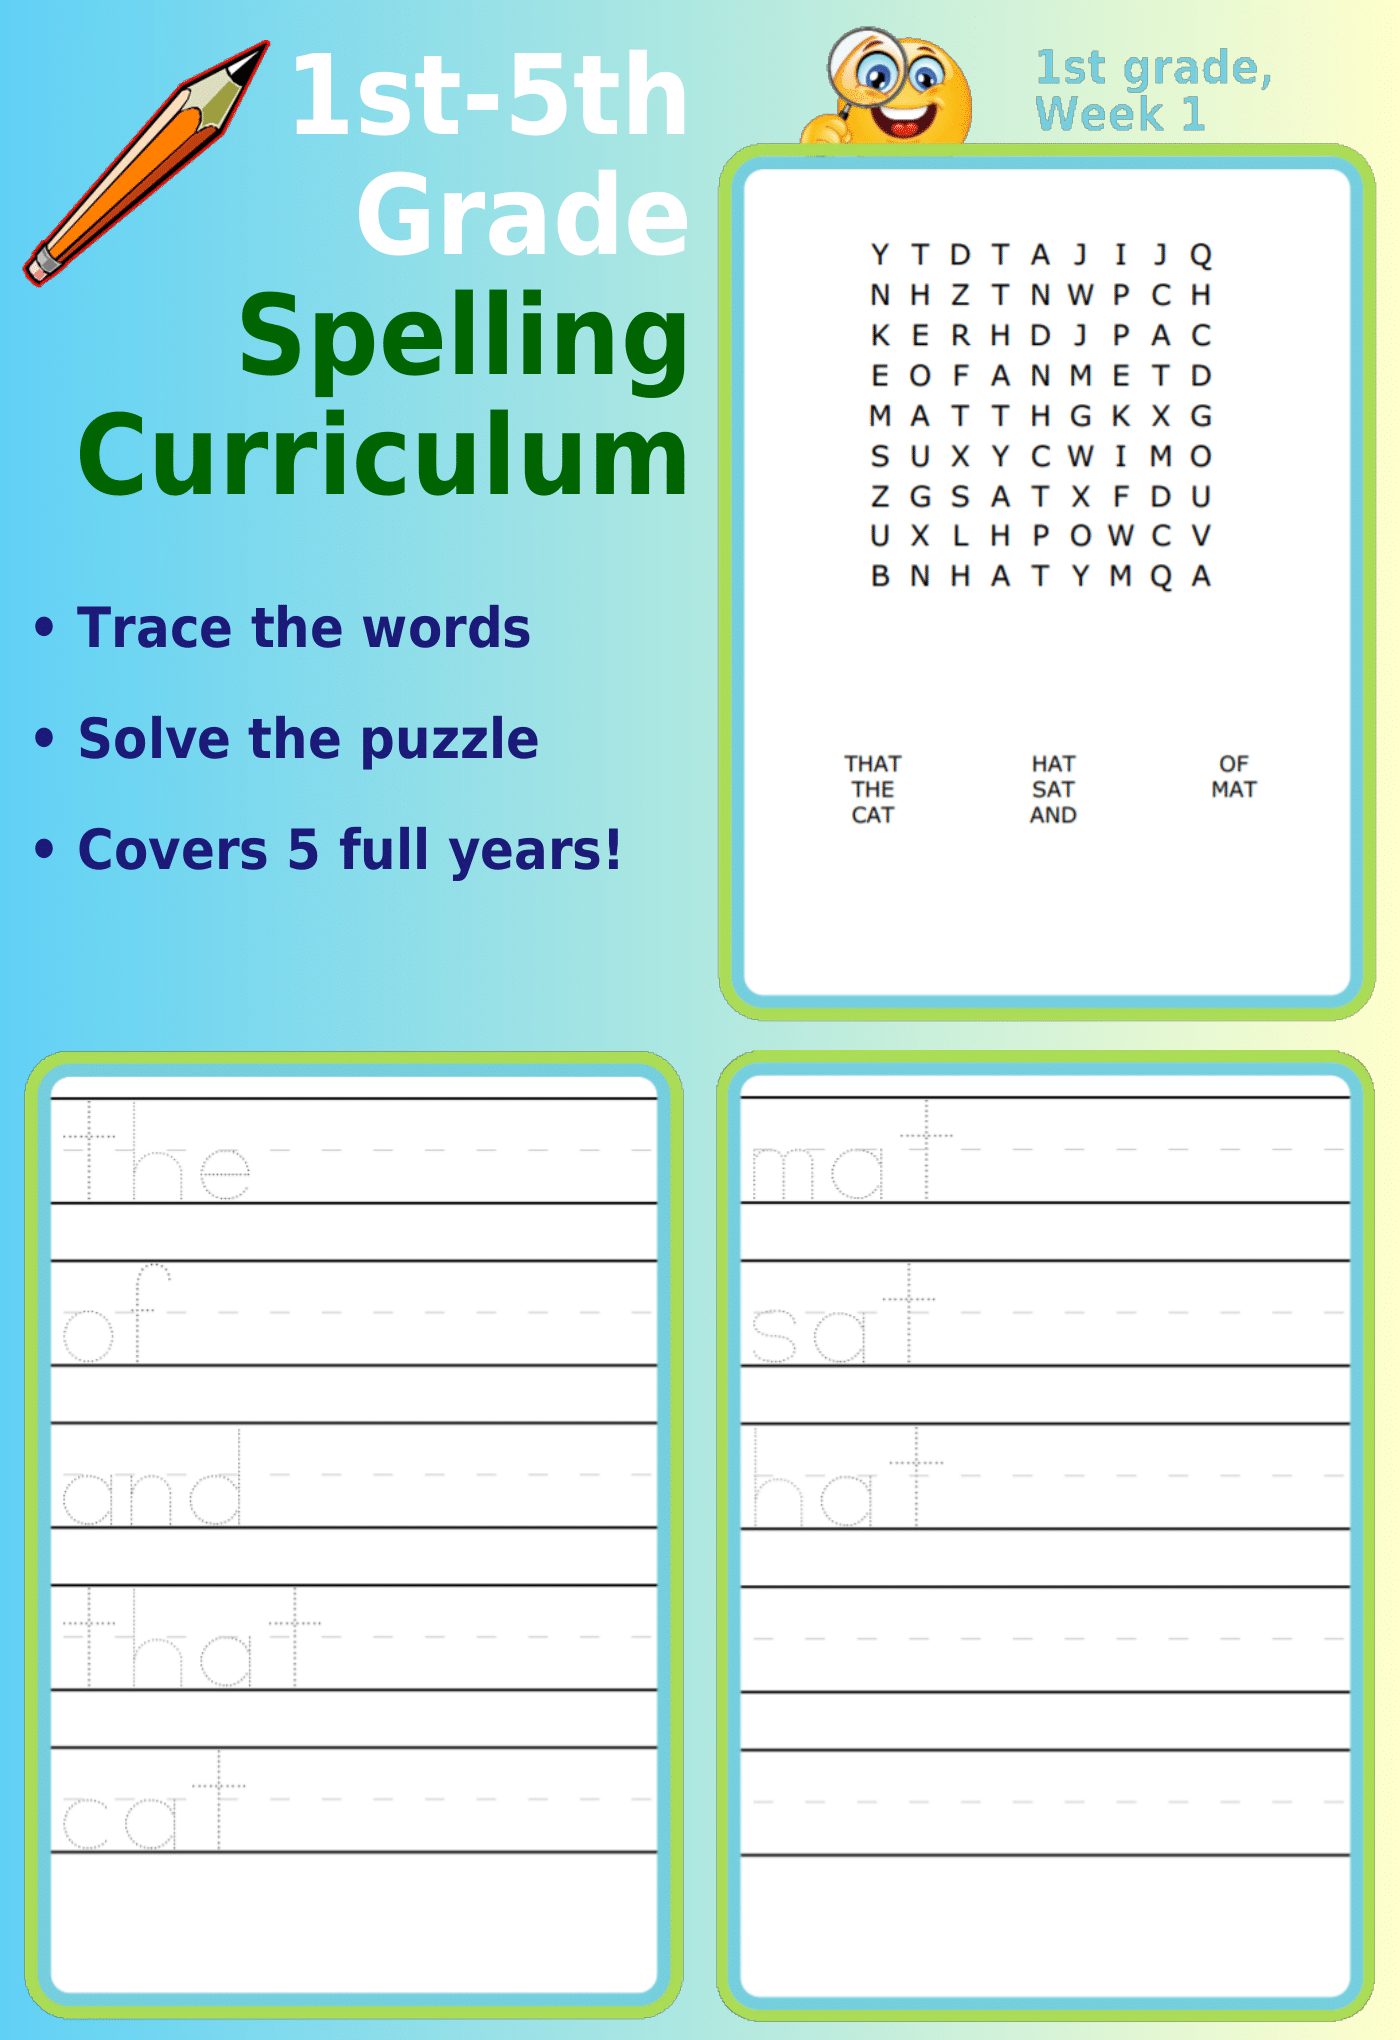 1st-5th Grade Spelling Curriculum: Word search and letter tracing